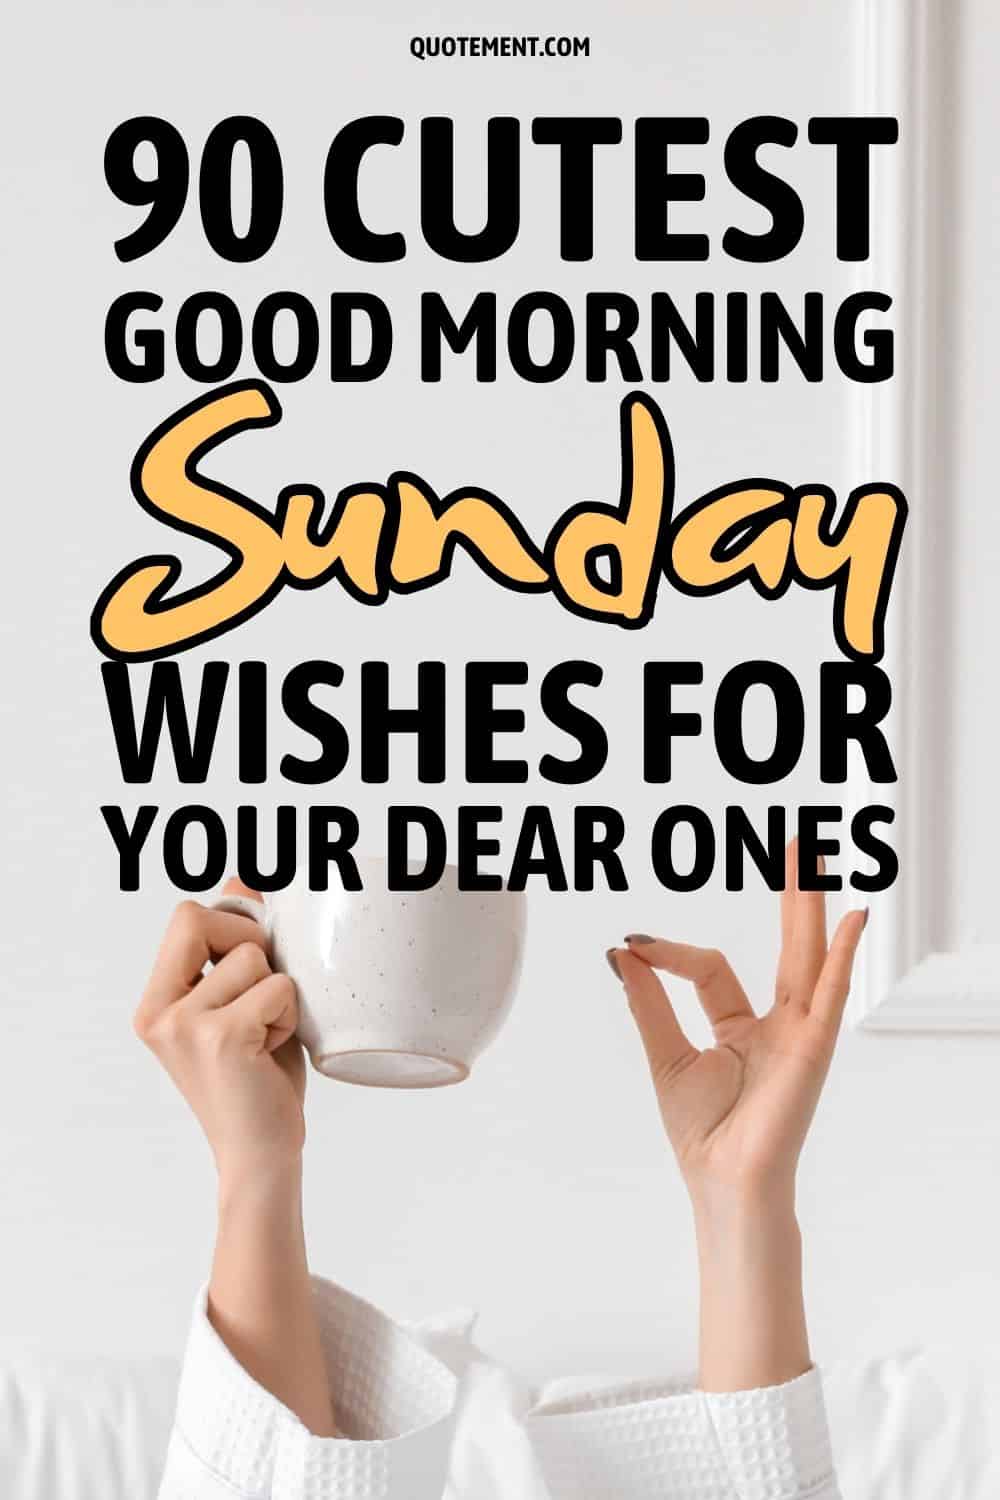 90 Cutest Good Morning Sunday Wishes For Your Dear Ones 